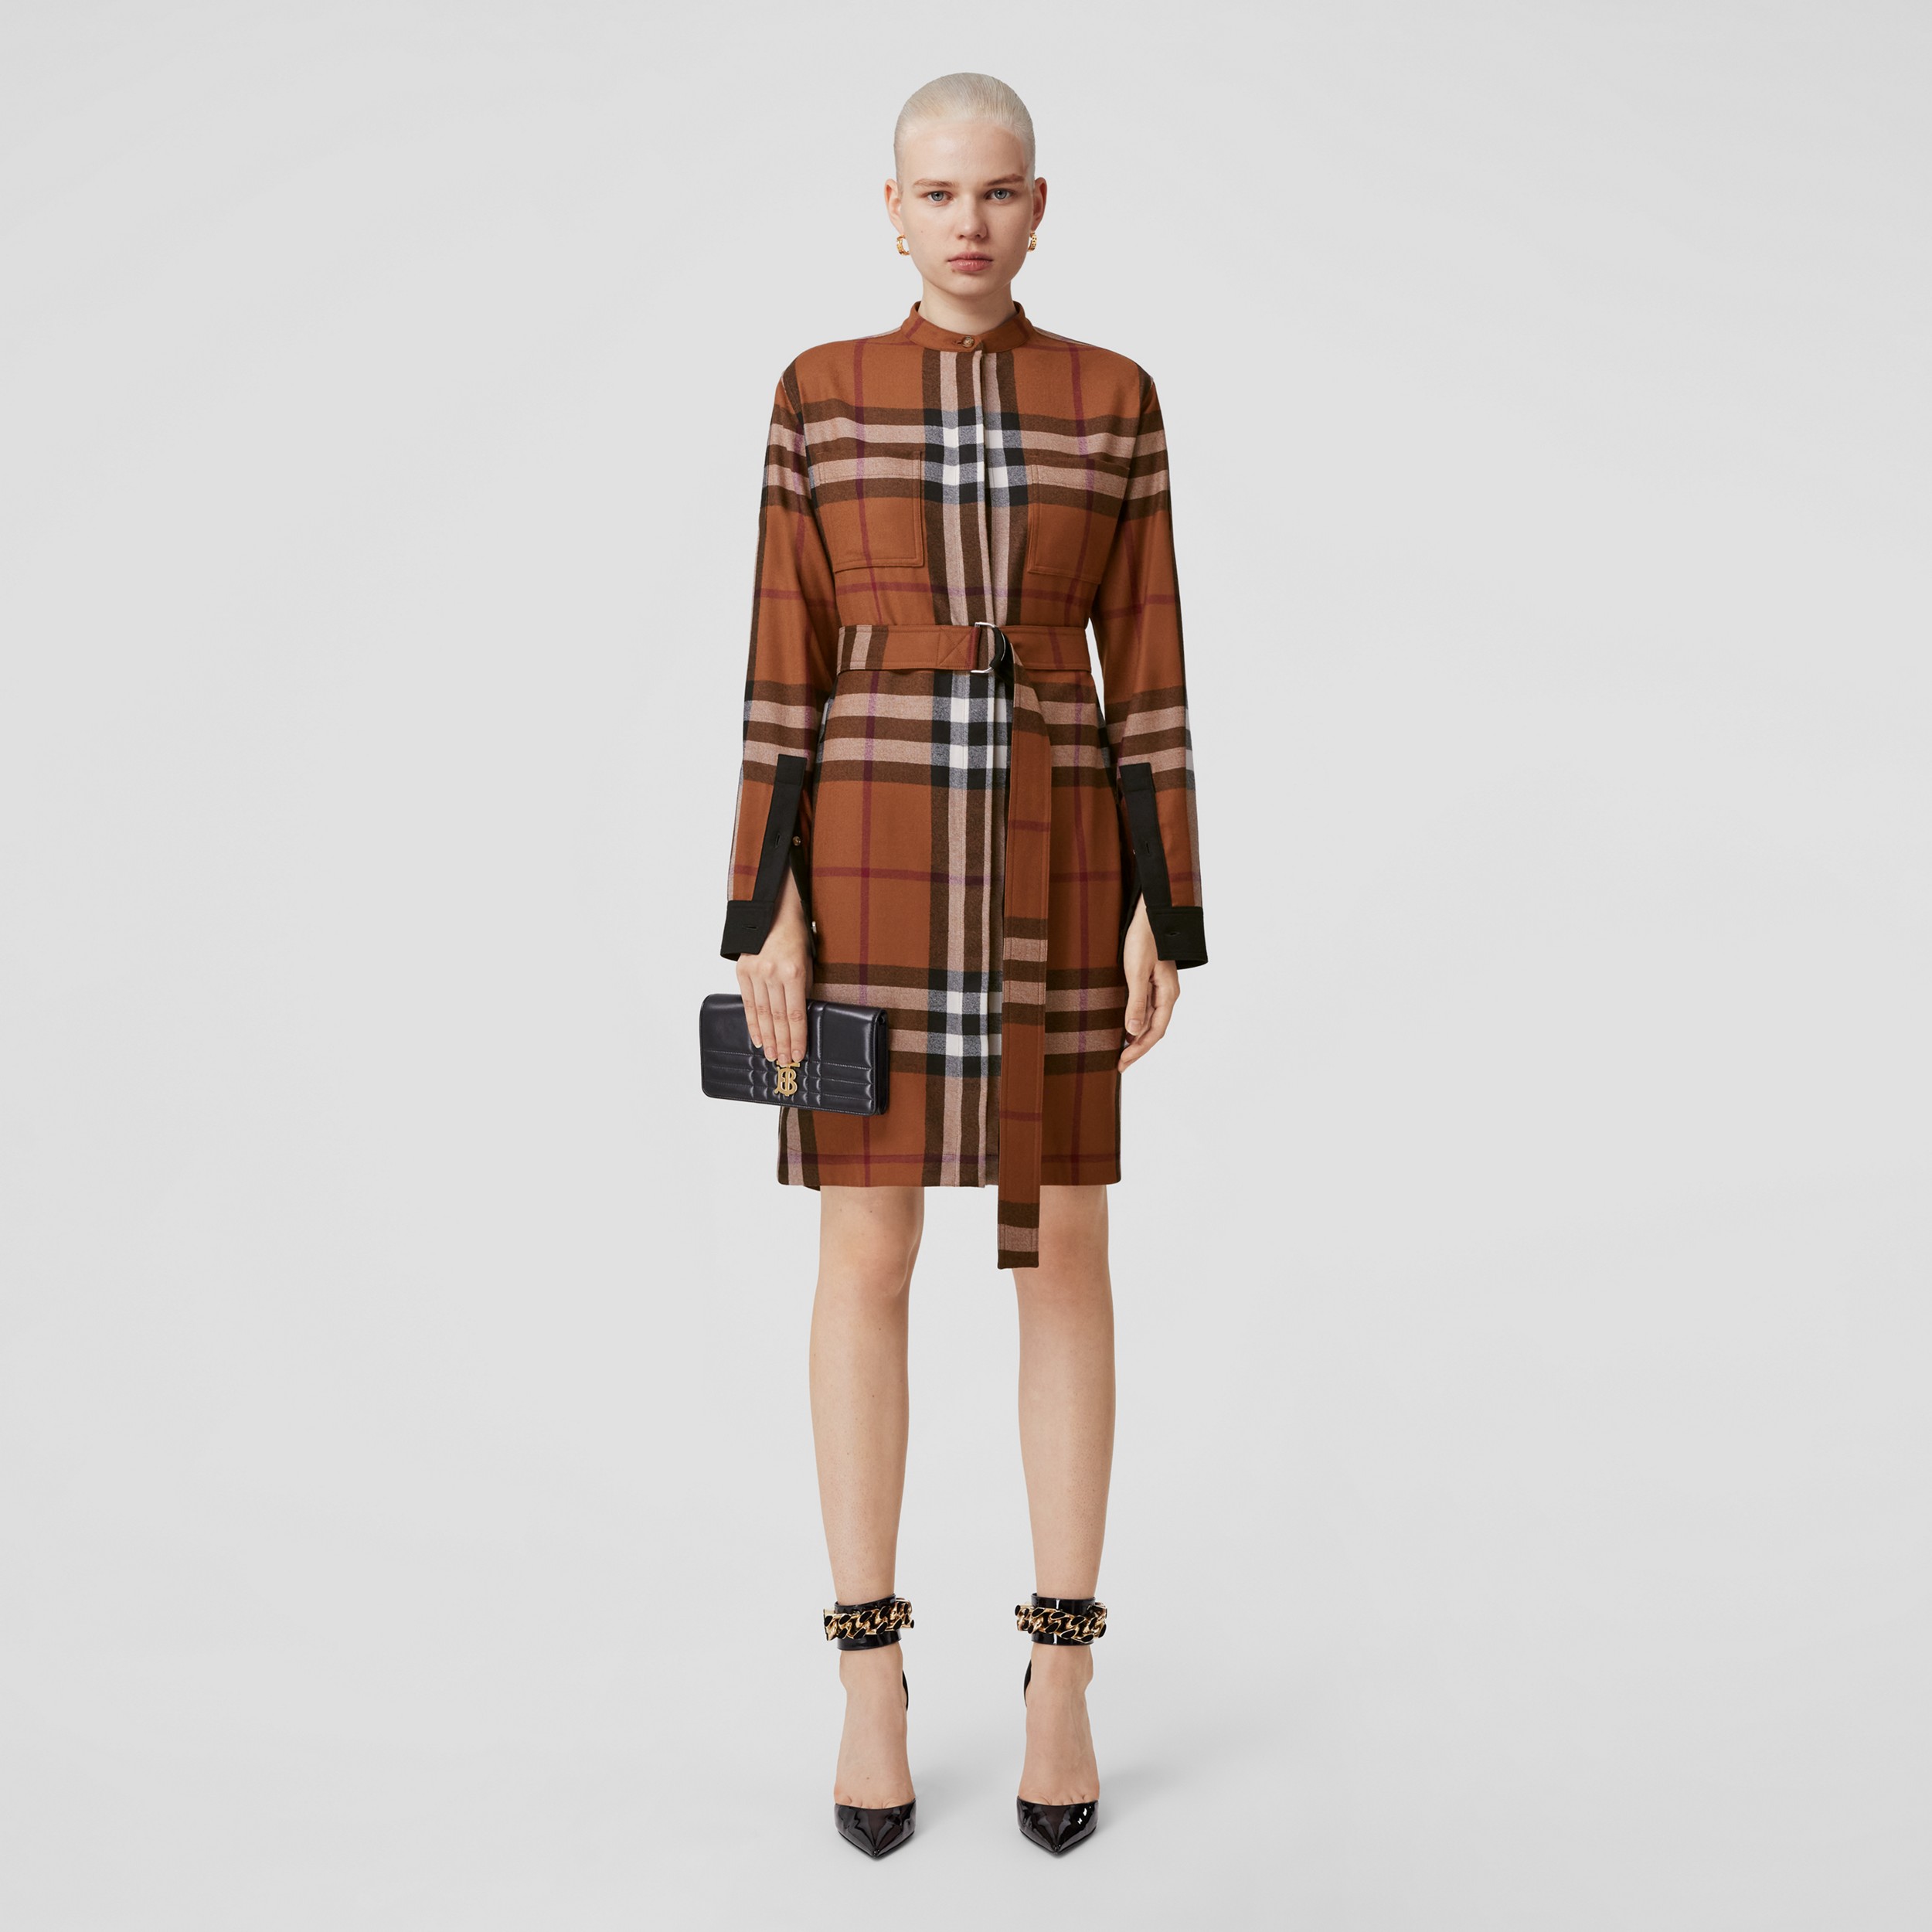 taal Koppeling diepvries Exaggerated Check Wool Belted Shirt Dress in Dark Birch Brown - Women |  Burberry® Official